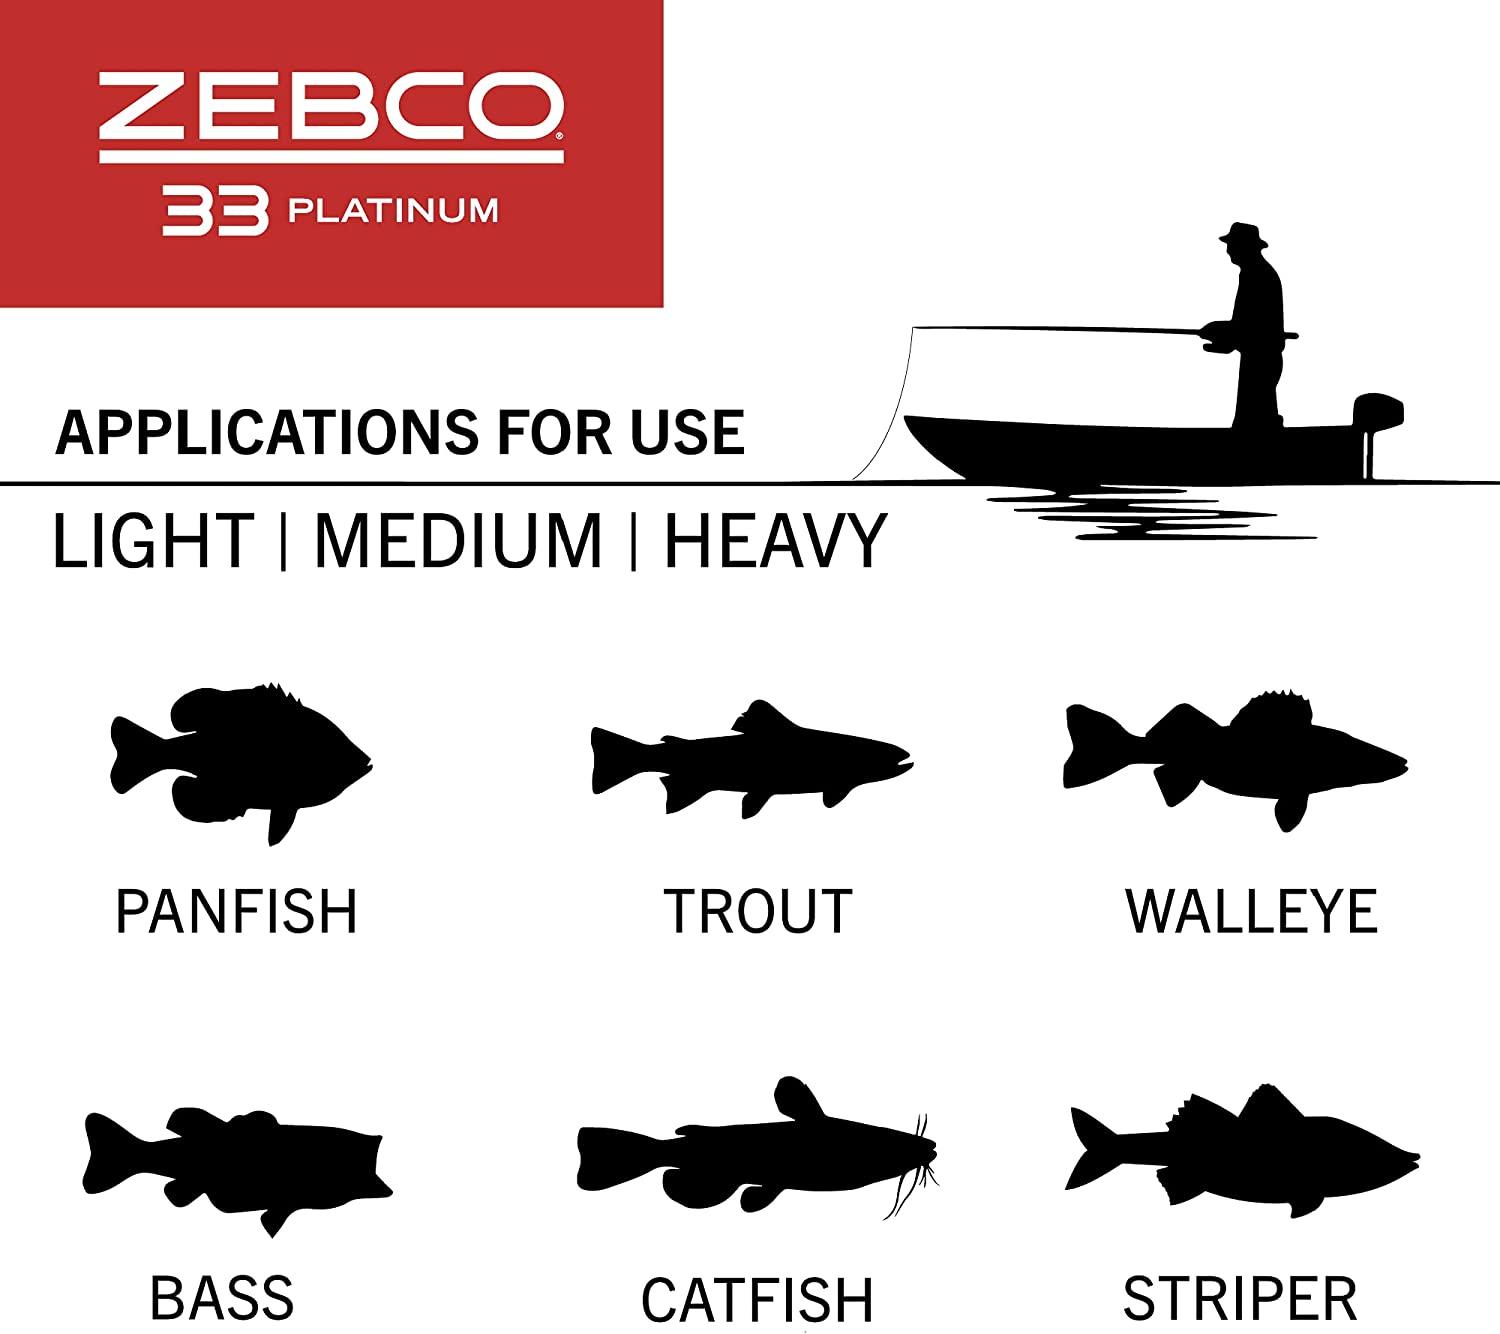 Zebco 33 Platinum Spincast Reel, 5 Ball Bearings (4 + Clutch), Instant  Anti-Reverse with a Smooth Dial-Adjustable Drag, Powerful All-Metal Gears  and Spooled with 10-Pound Cajun Line Platinum Reel